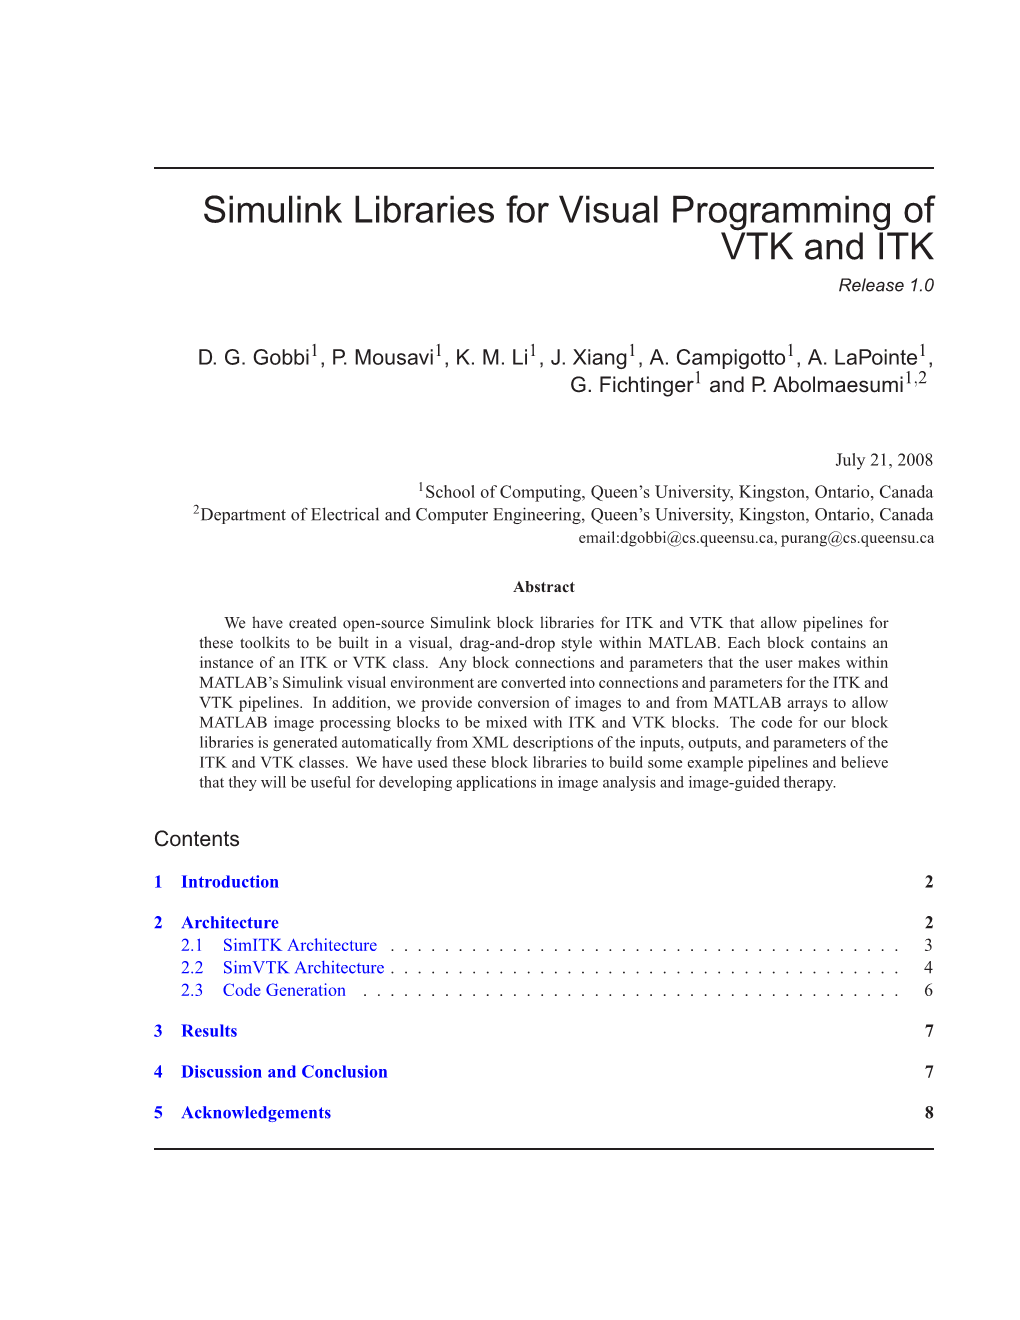 Simulink Libraries for Visual Programming of VTK and ITK Release 1.0